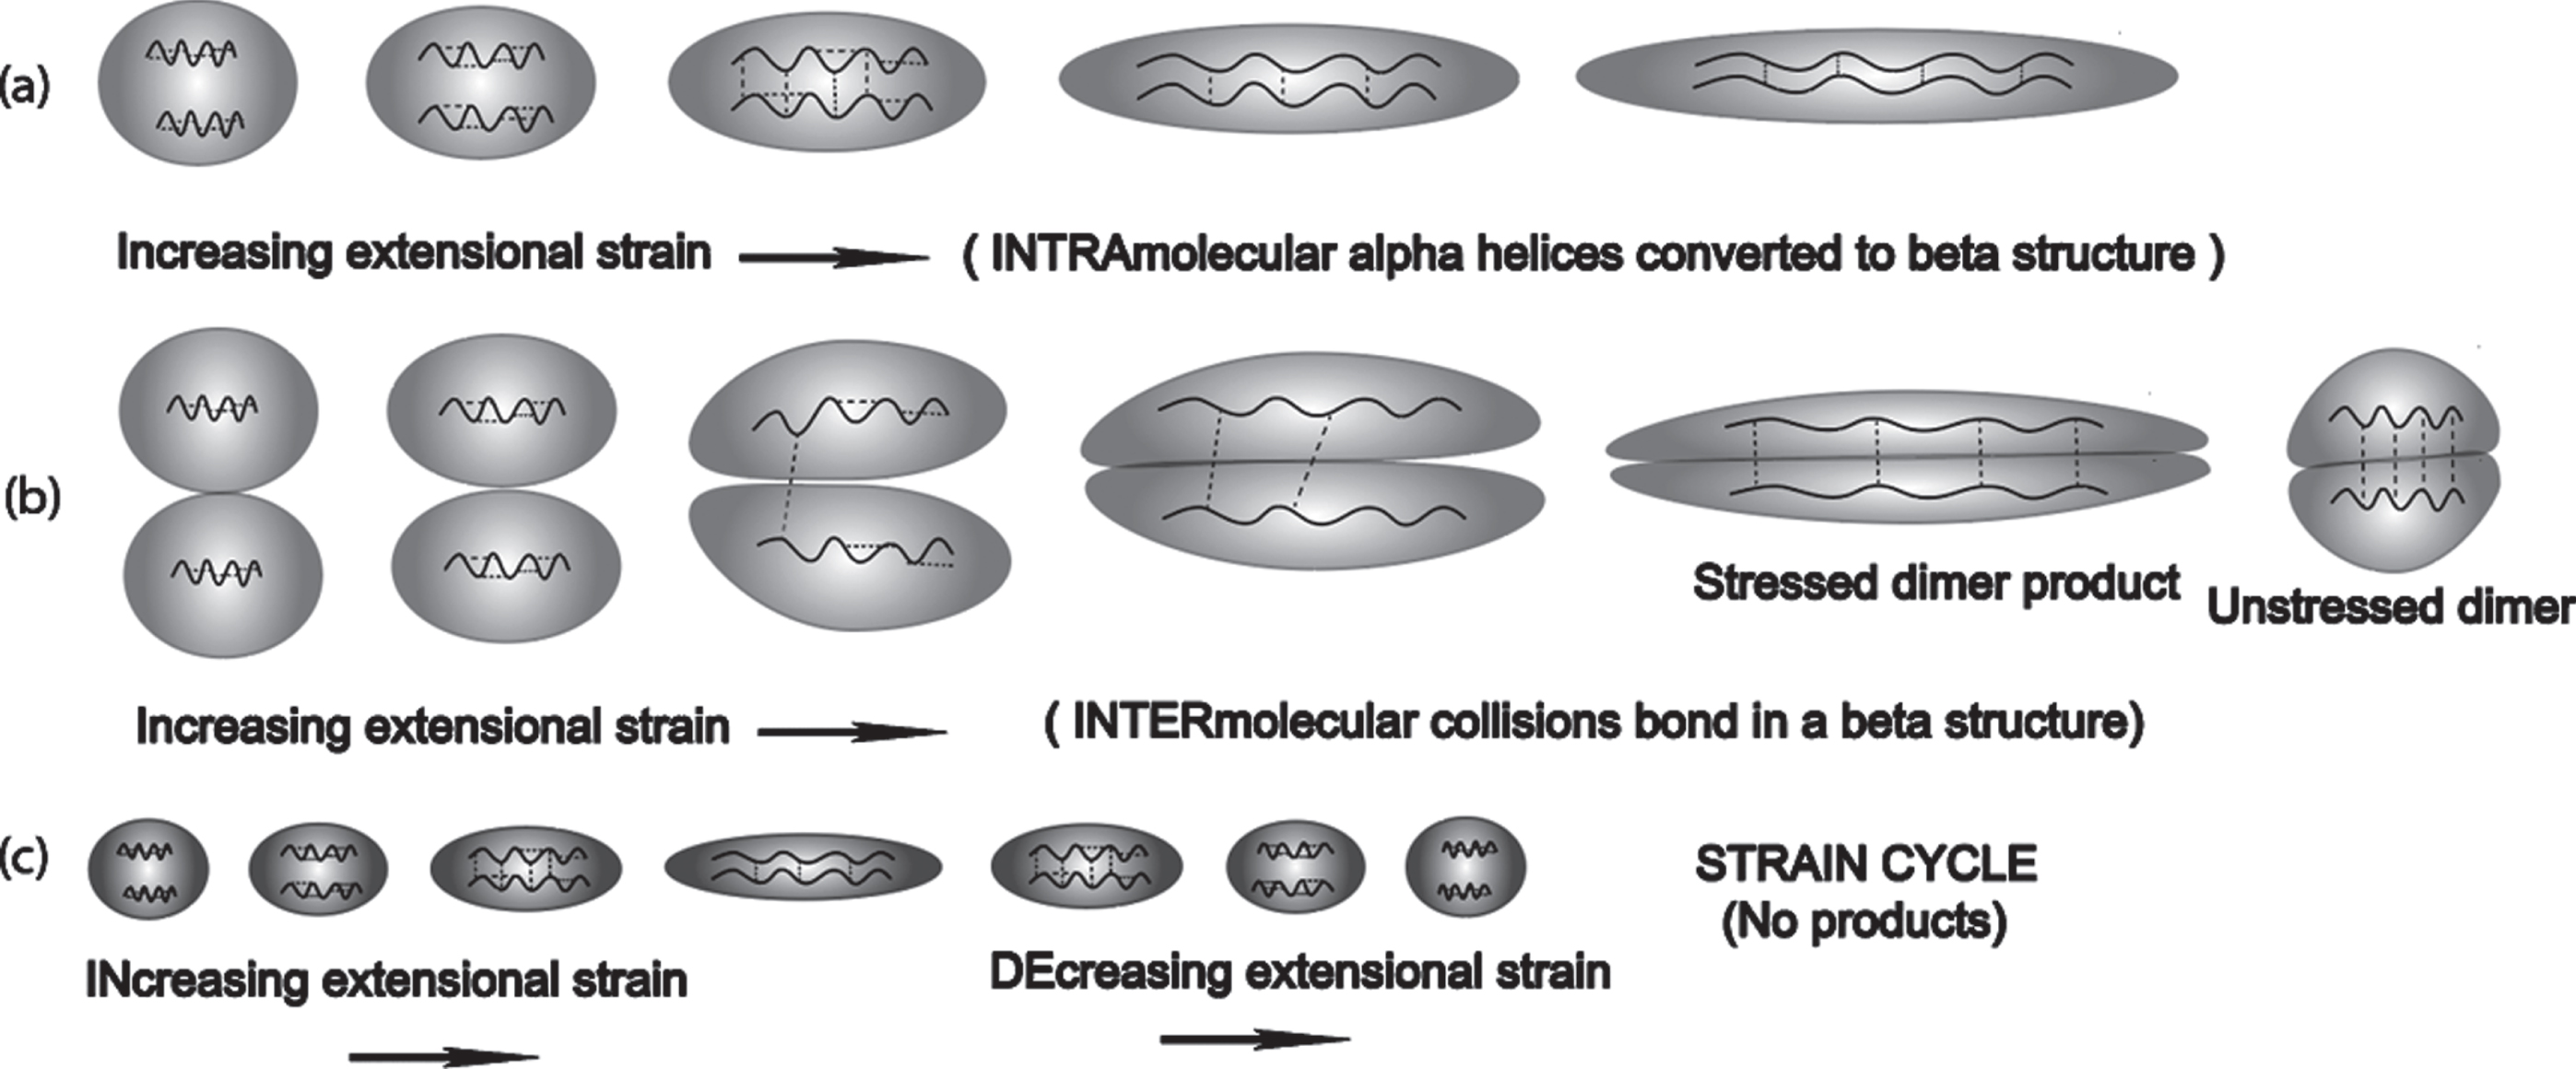 Extensional flow-induced transformation from an alpha to beta conformation via intramolecular and intermolecular mechanisms: (a) Two nearby alpha helical segments within the same molecule are exposed to extensional flow to such a point where their protein backbones are exposed to each other resulting in an alpha to beta conformation change within a single molecule; (b) When the molecular concentration is high enough, a concentration dependent-bimolecular collision between extensional flow-stretched molecules can produce a dimer that is much more stable than the monomer; (c) However, if the strain-induced stretch is not sufficient to allow close proximity of each alpha helix in a single molecule, then there is a lack of intramolecular product formation, resulting in heat release.